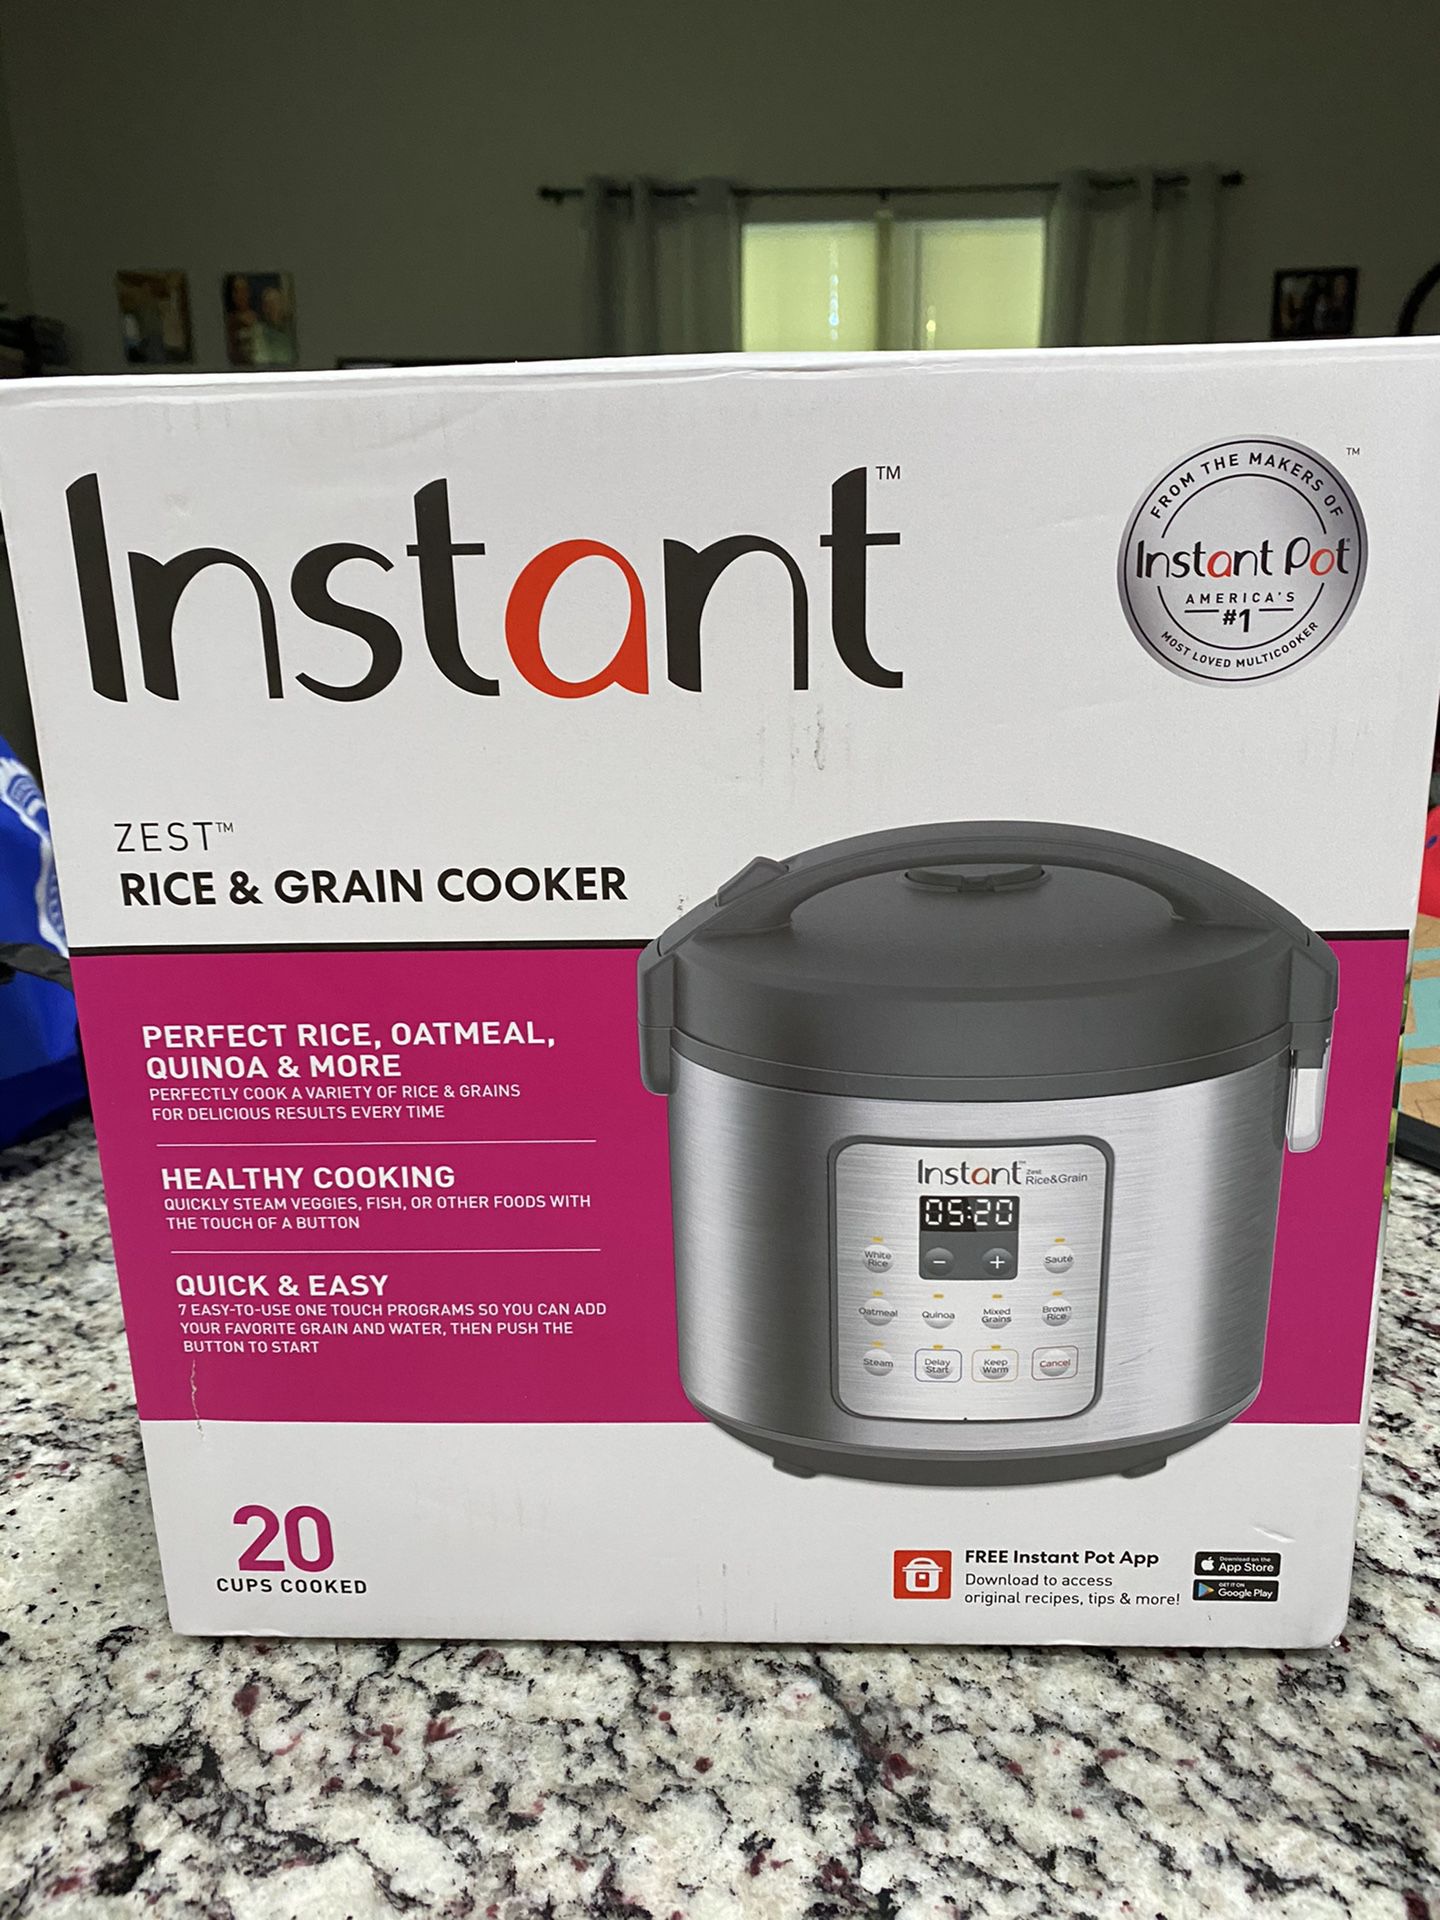 Instant Pot rice and grain cooker